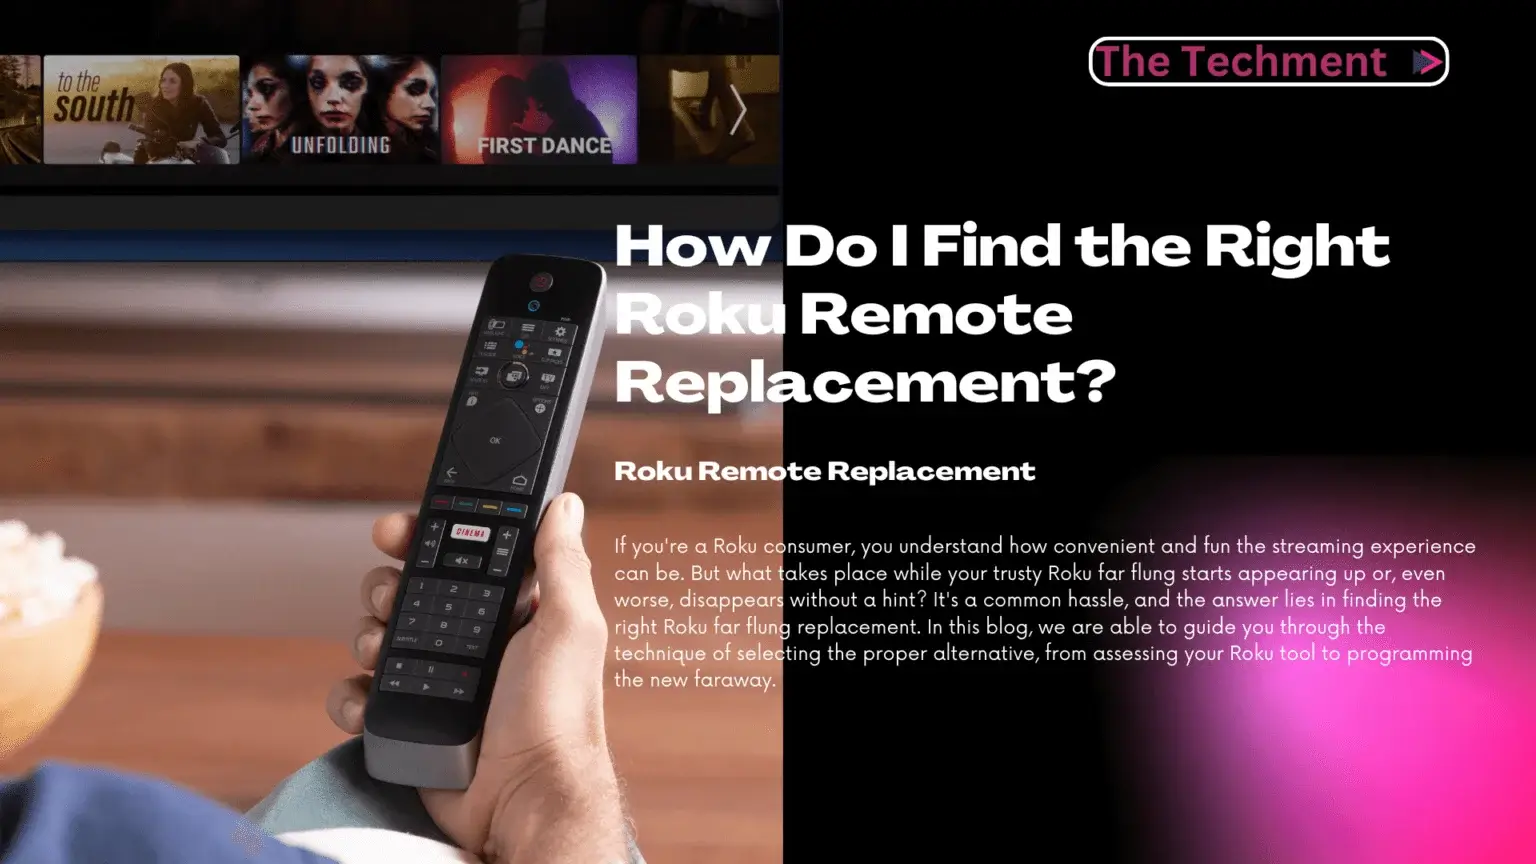 Roku Remote Replacement